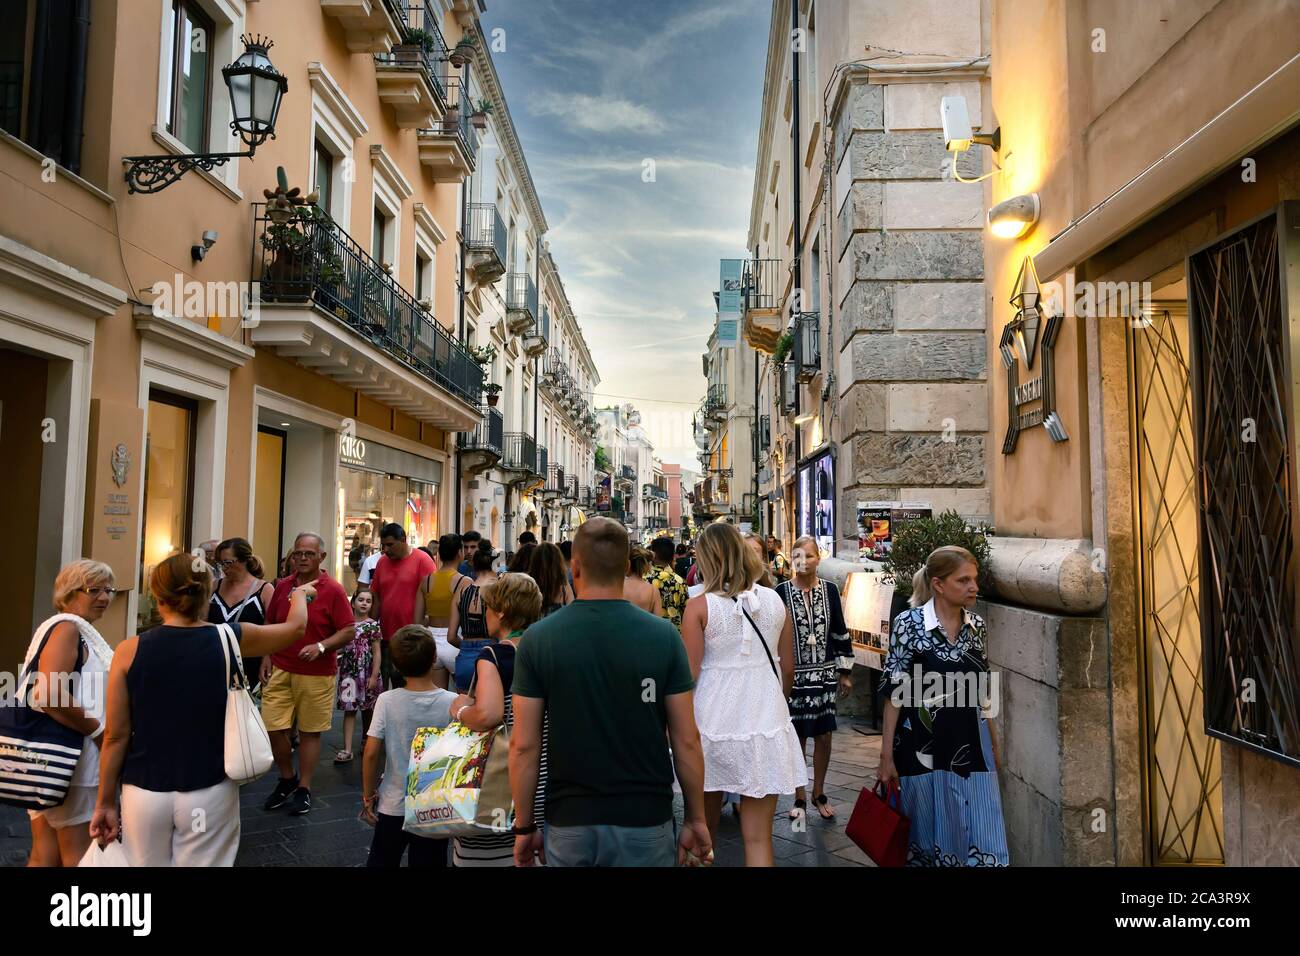 Taormina, ME, Italy, August 9, 2019: A crowd of tourists strolling along Corso Umberto in the historic center of Taormina in Sicily, Italy Stock Photo